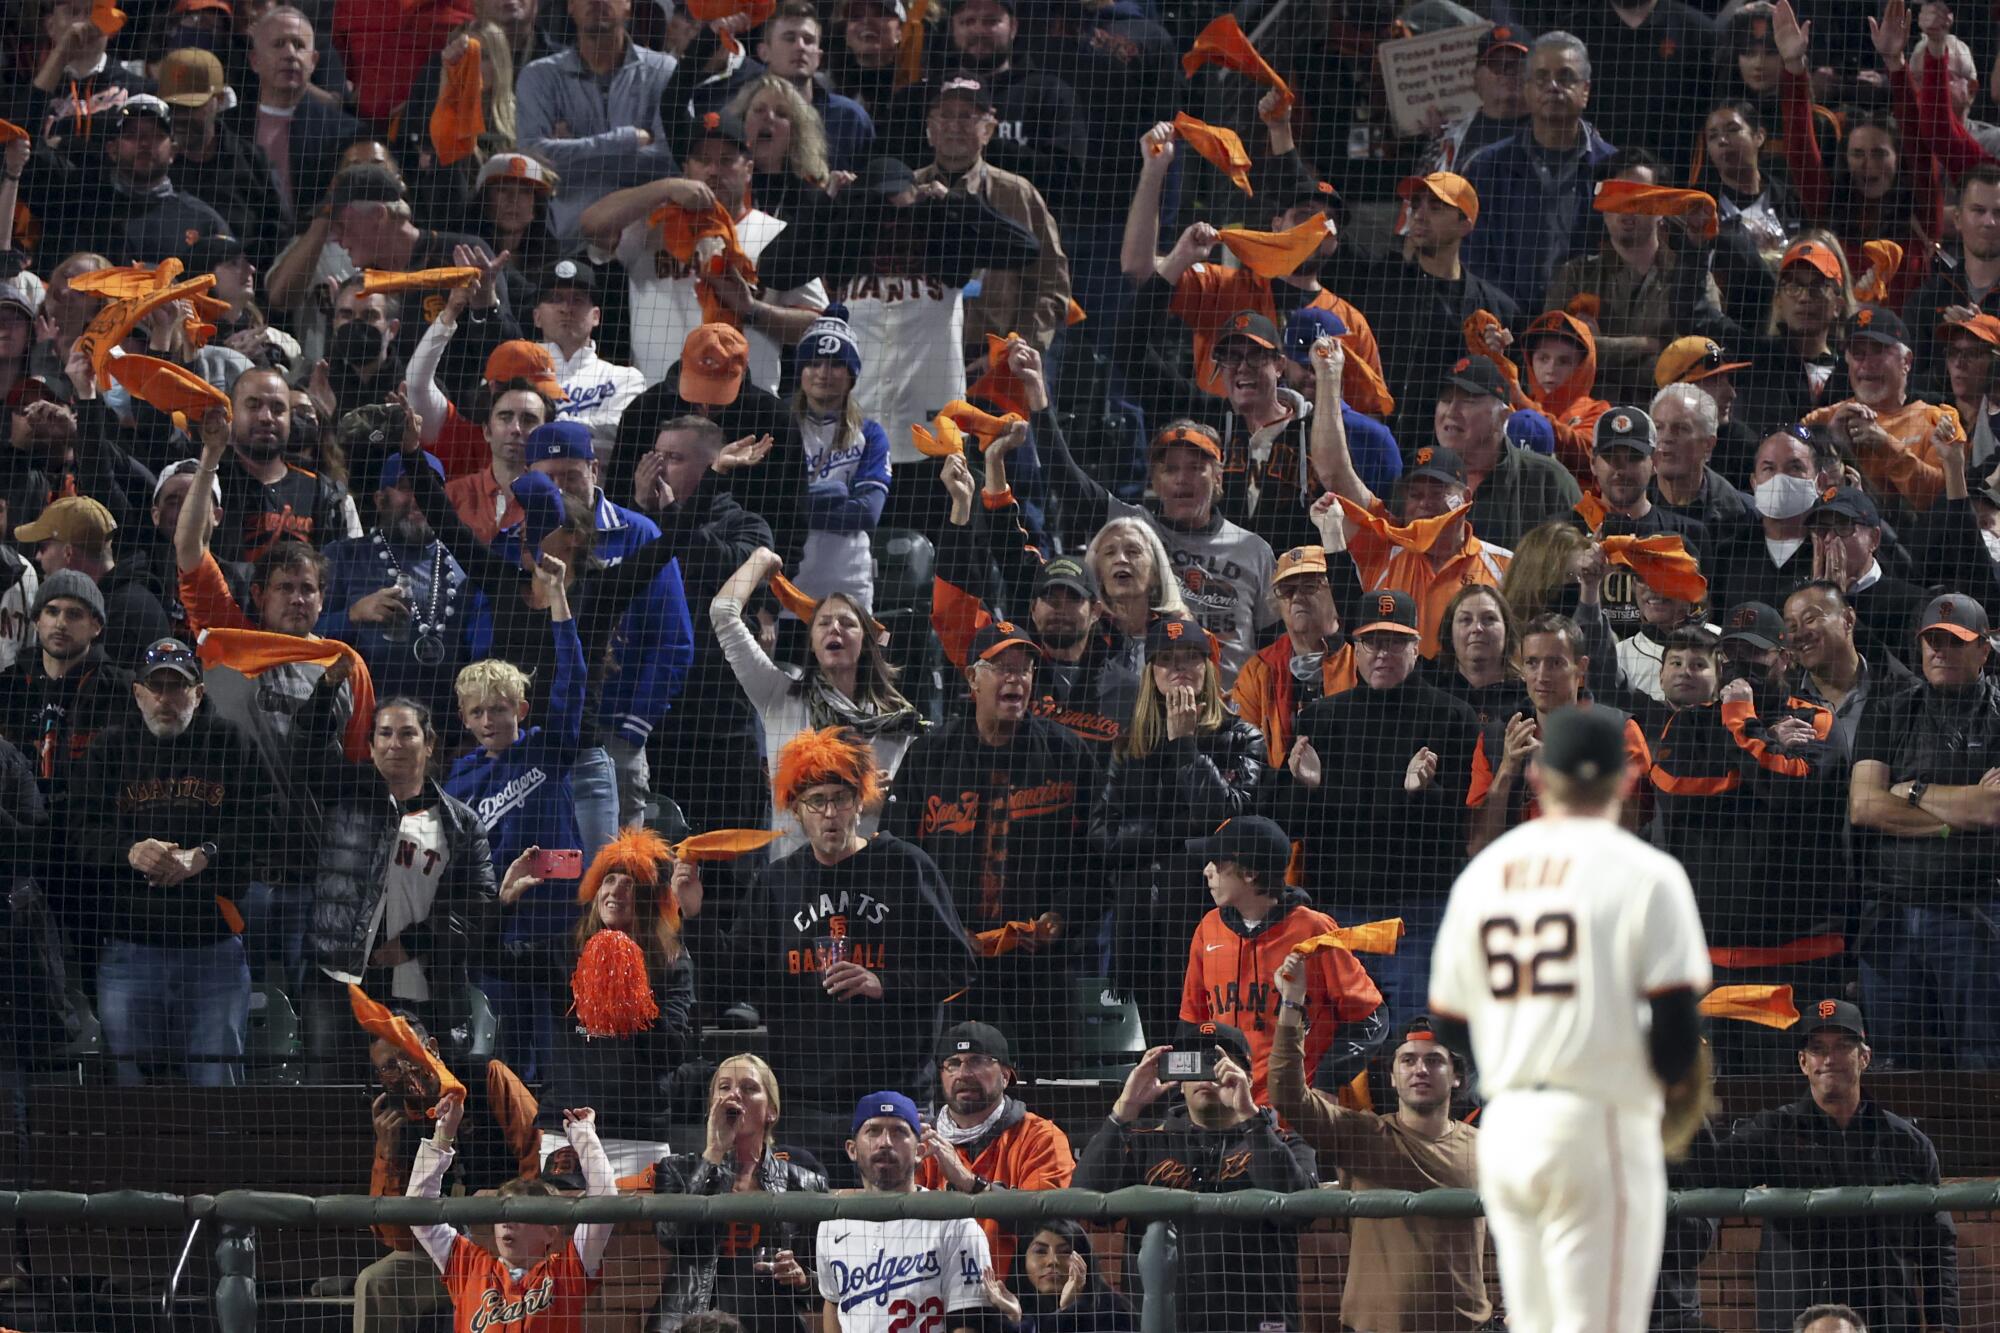 San Francisco Giants fans cheer as starting pitcher Logan Webb prepares to pitch